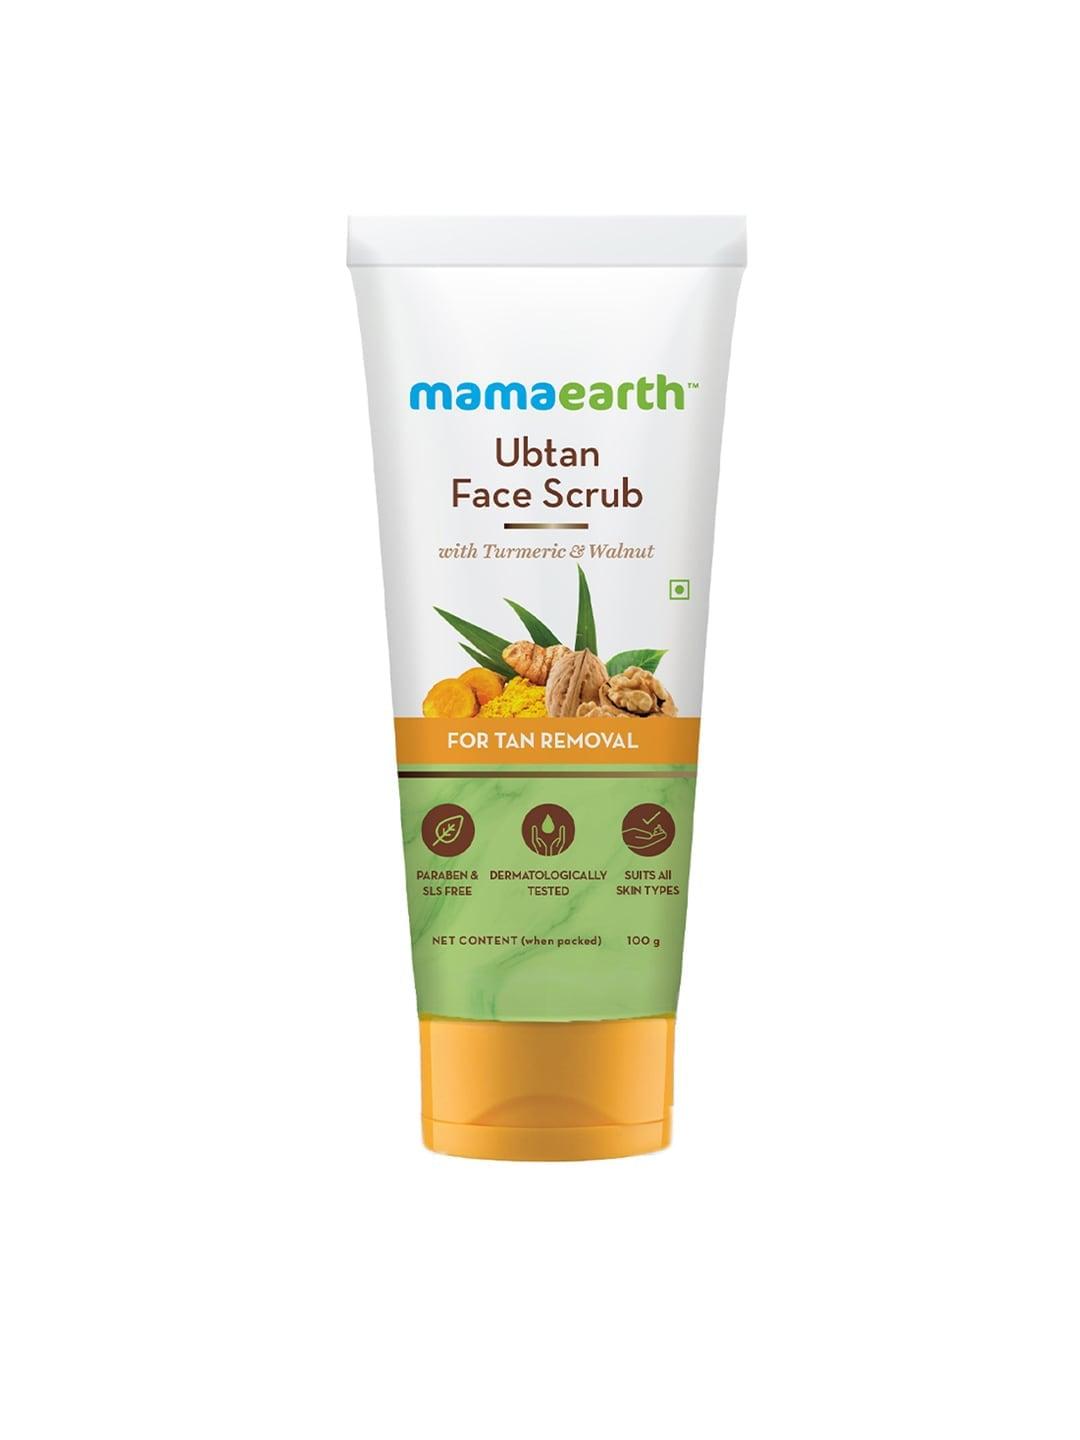 mamaearth sustainable ubtan face scrub with turmeric & walnut for tan removal 100 g